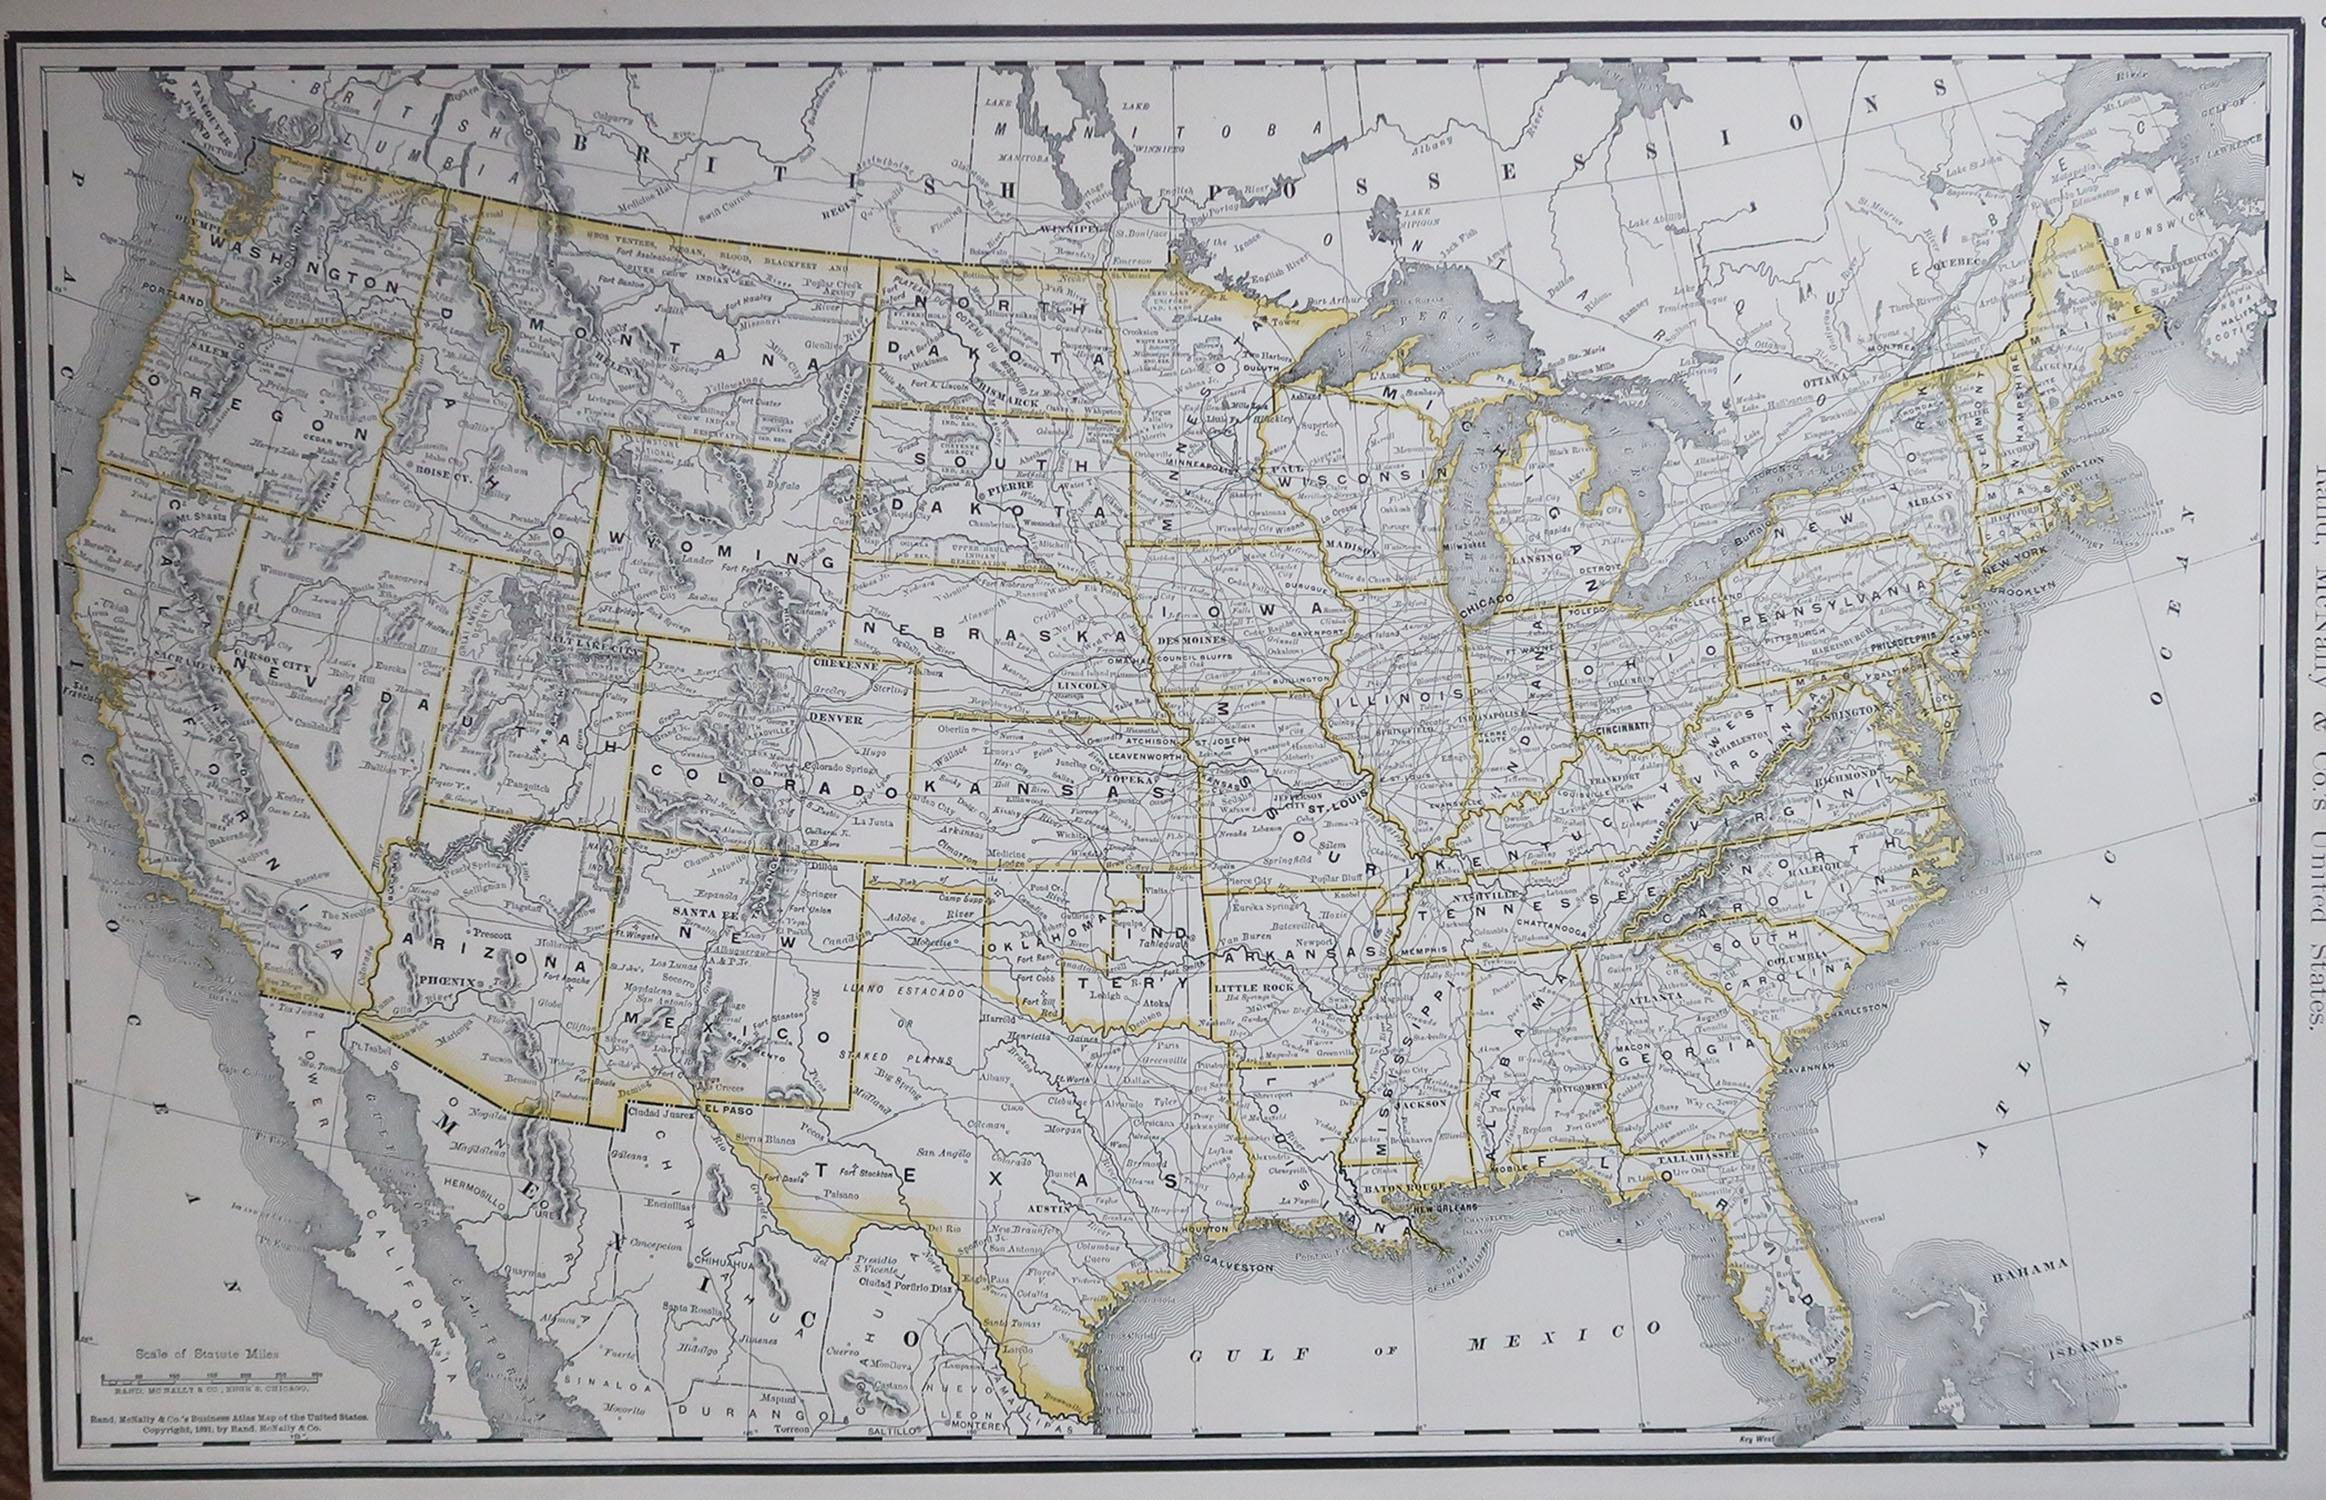 Fabulous map of The United States

Original color

By Rand, McNally & Co.

Dated 1891

Unframed

Free shipping.